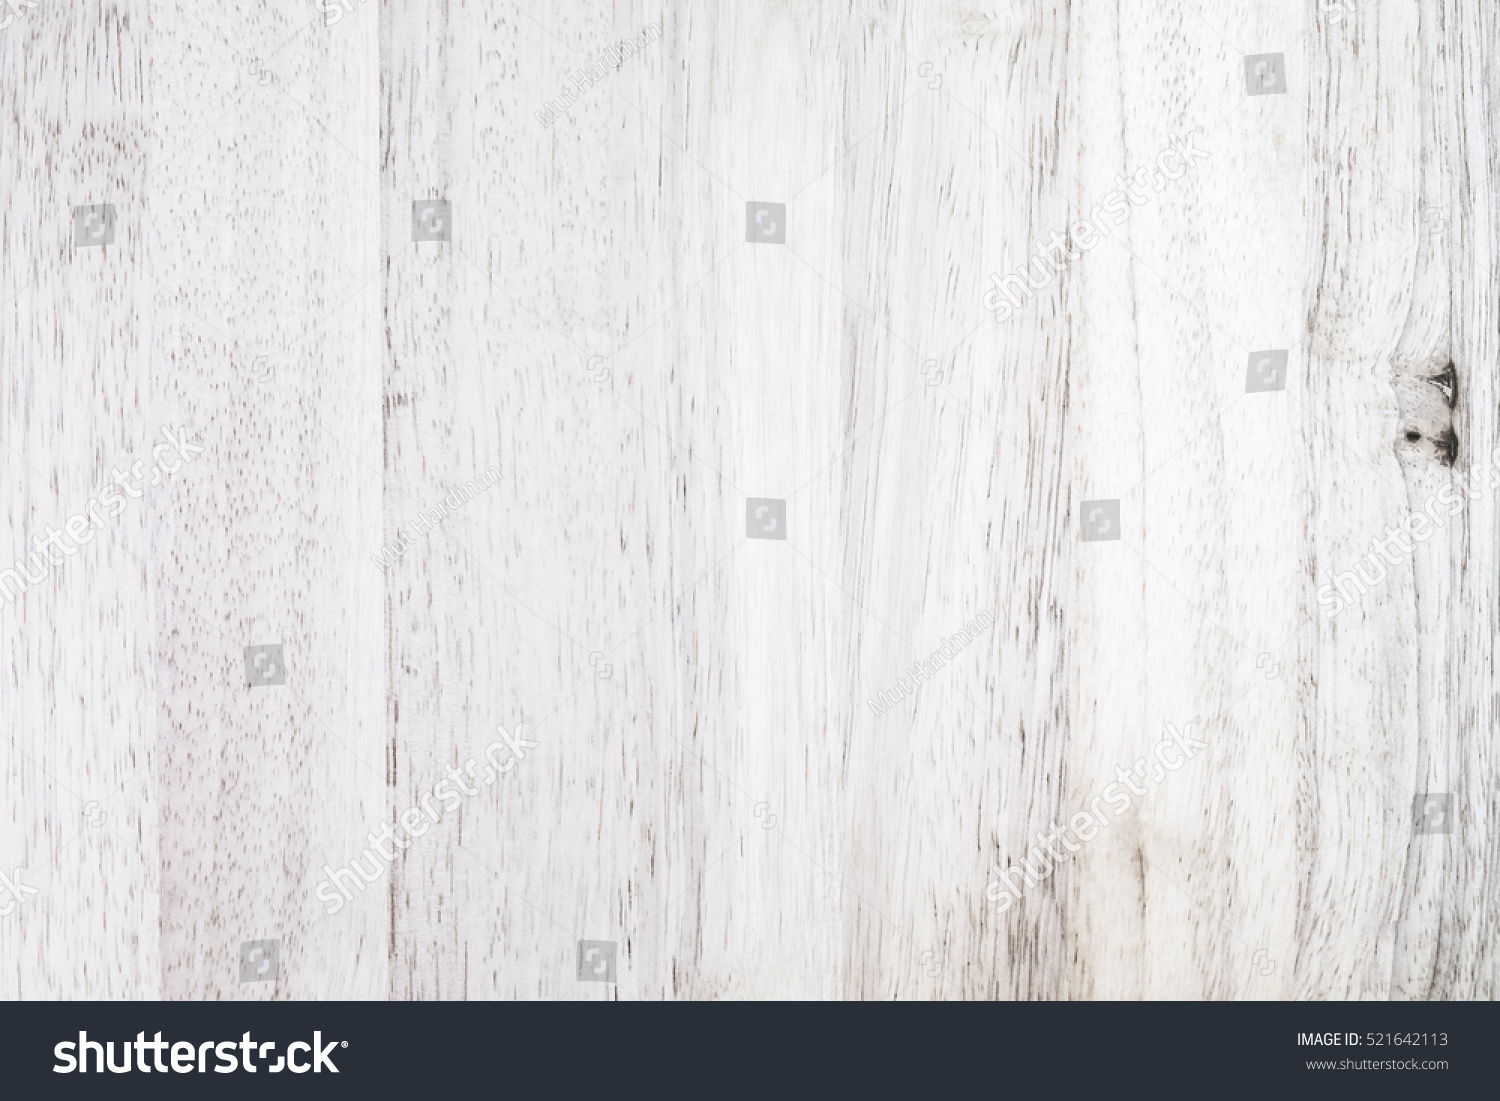 Above view of white wooden table rustic texture background. Old striped wood lumber wall. Lightboard floor natural pattern. Vintage plank seamless wallpaper. Top-down #521642113